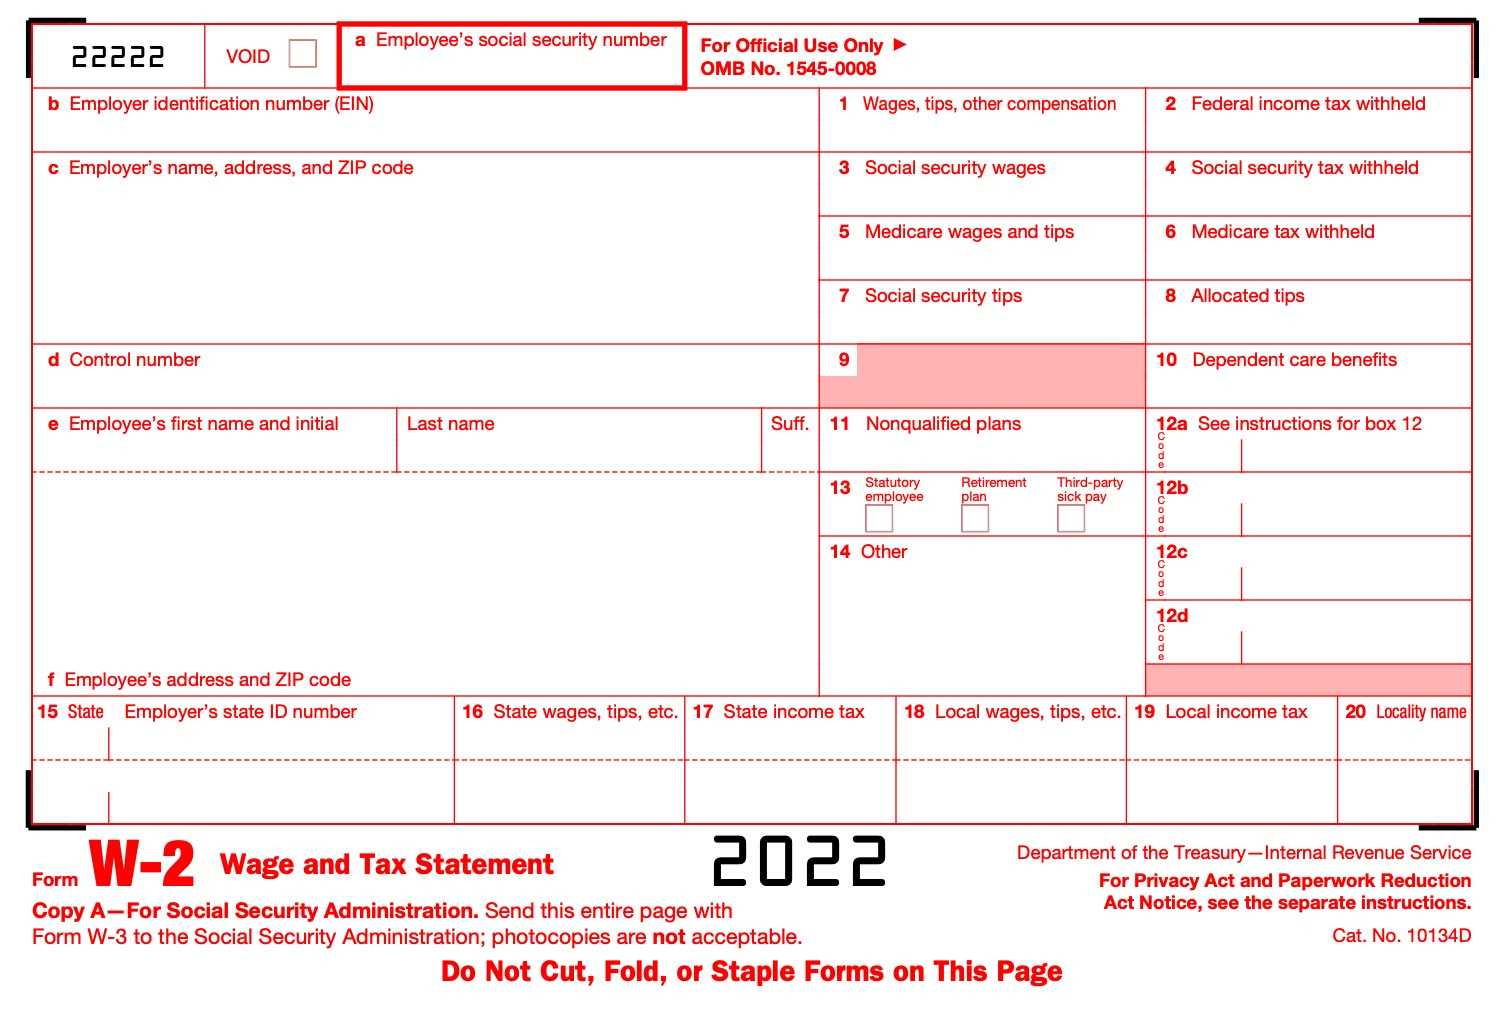 What Is Irs Form W-2? pertaining to When The W2 Forms Will Be Available